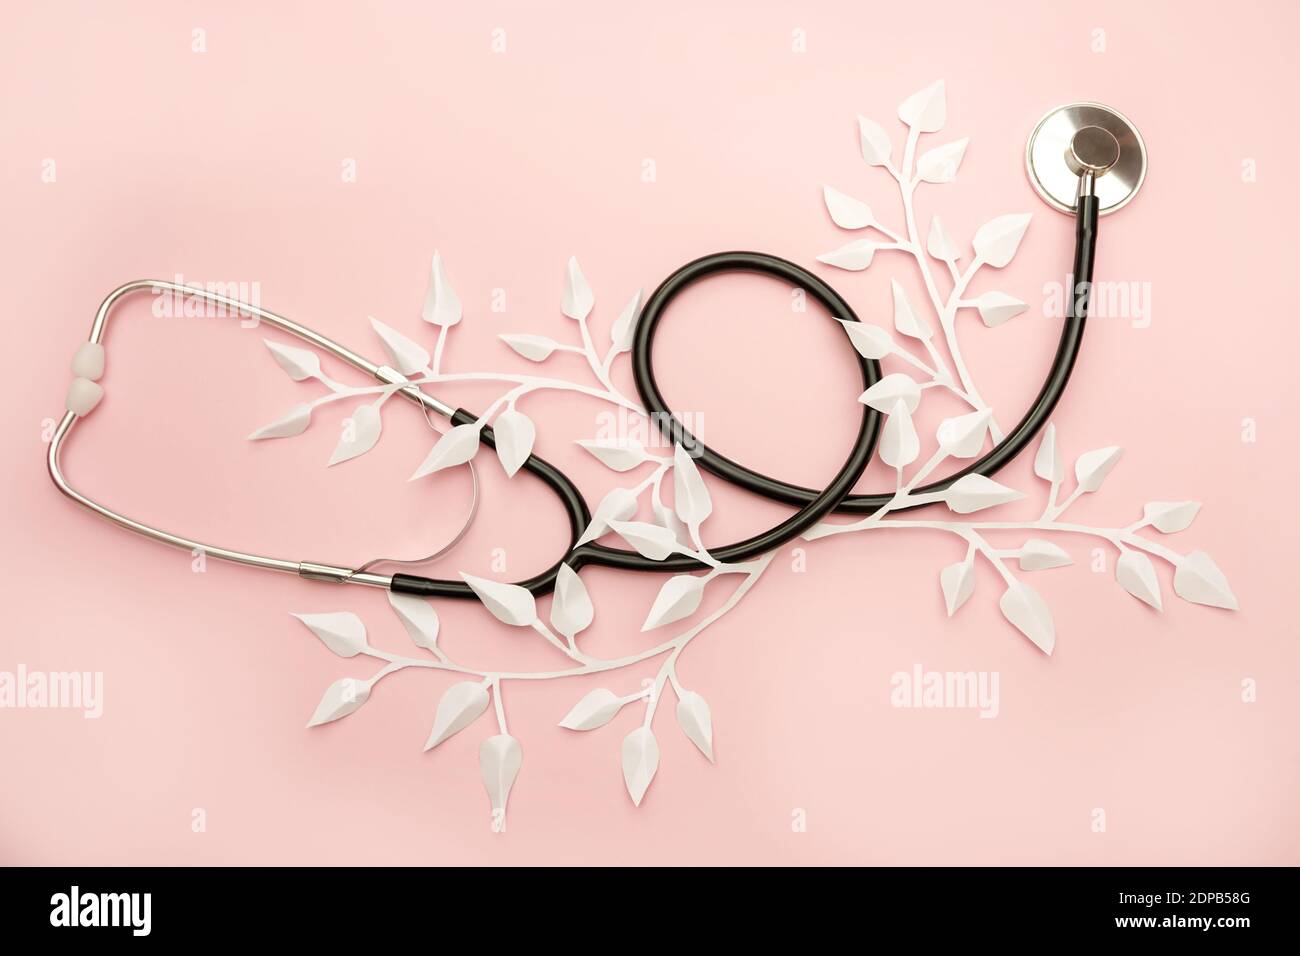 Medicine equipment stethoscope or phonendoscope on trendy pastel pink background. Instrument device for doctor. Stock Photo